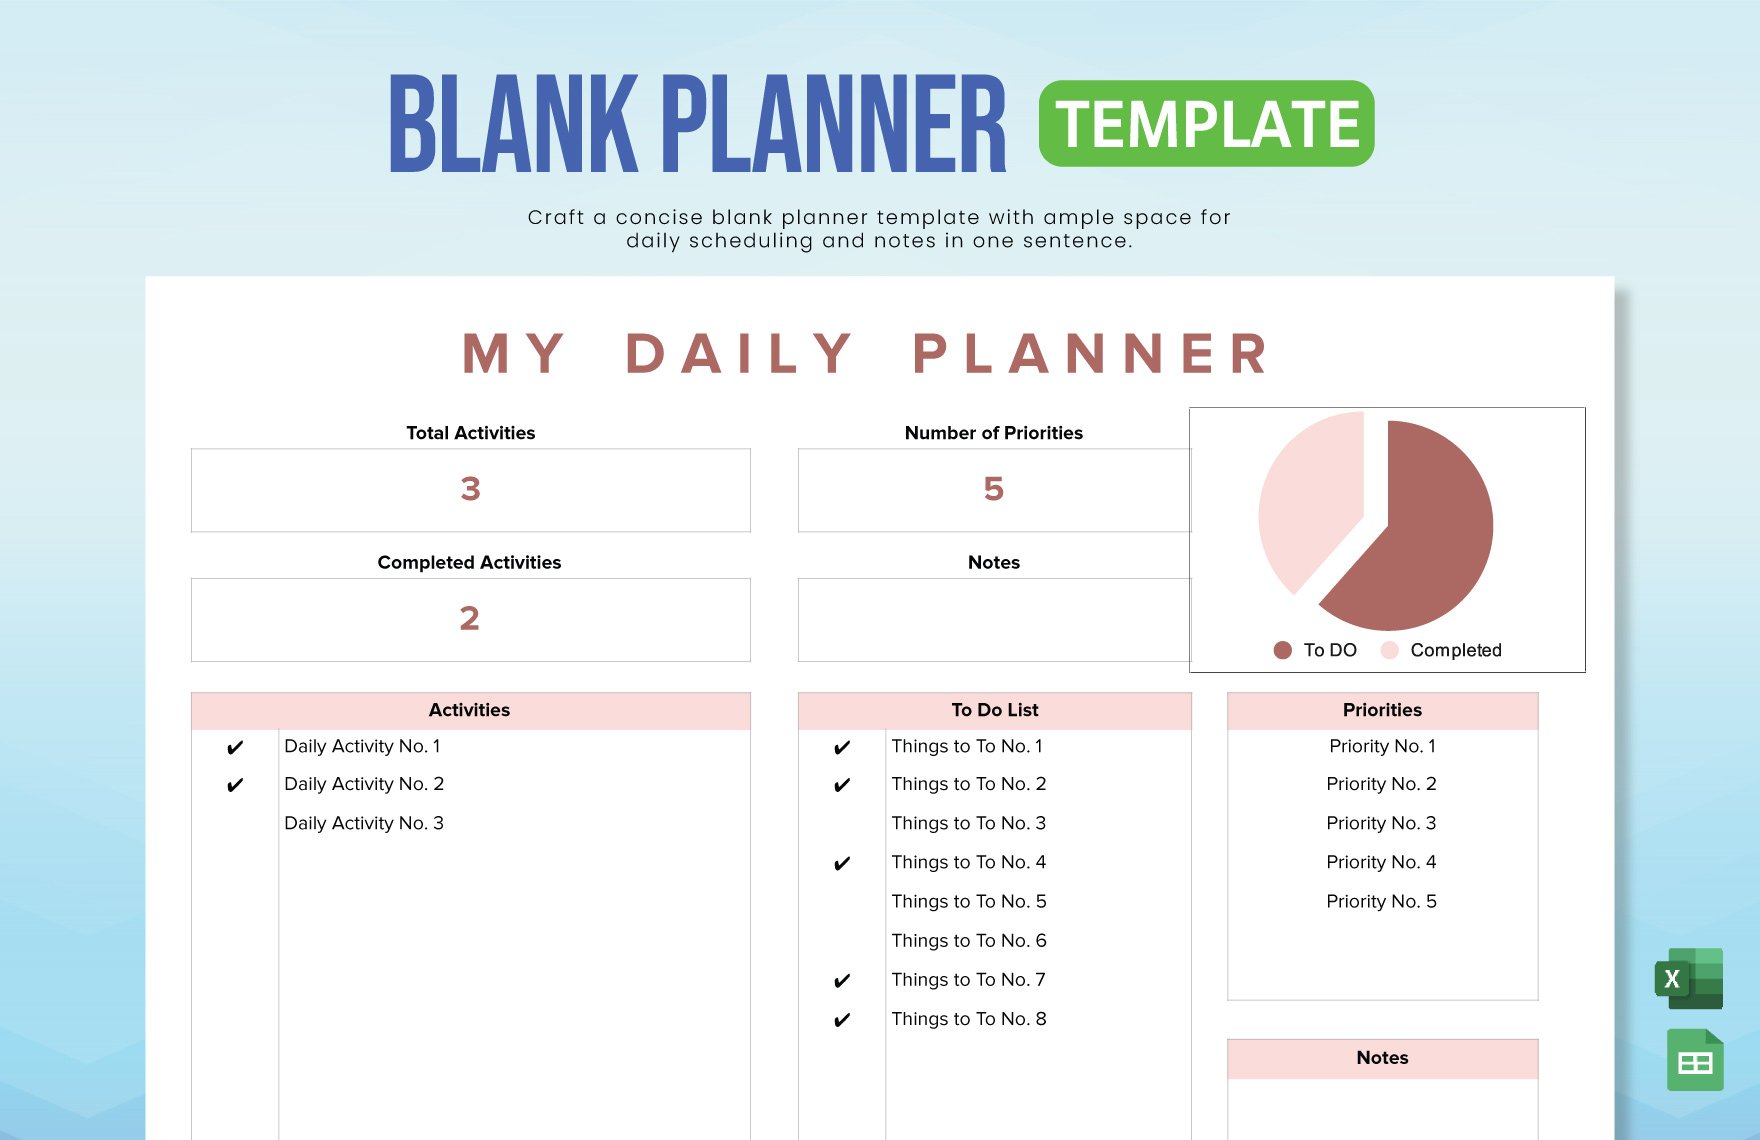 Free Blank Planner Template in Excel, Google Sheets